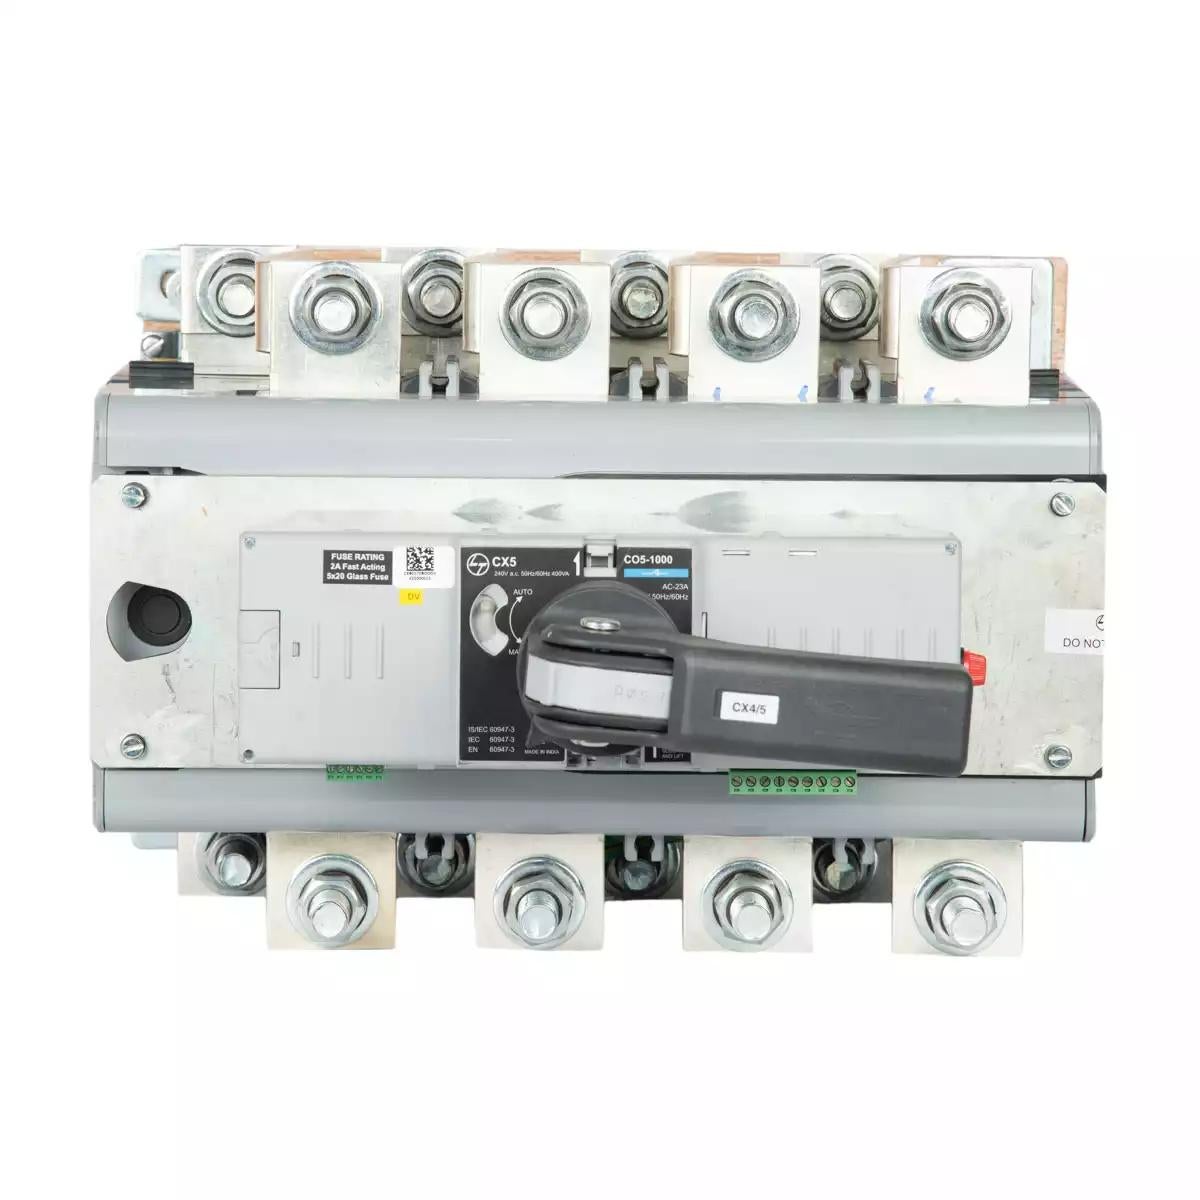 C-Line Motorised Changeover Switch FR5 630A 4P 415V AC Open Execution